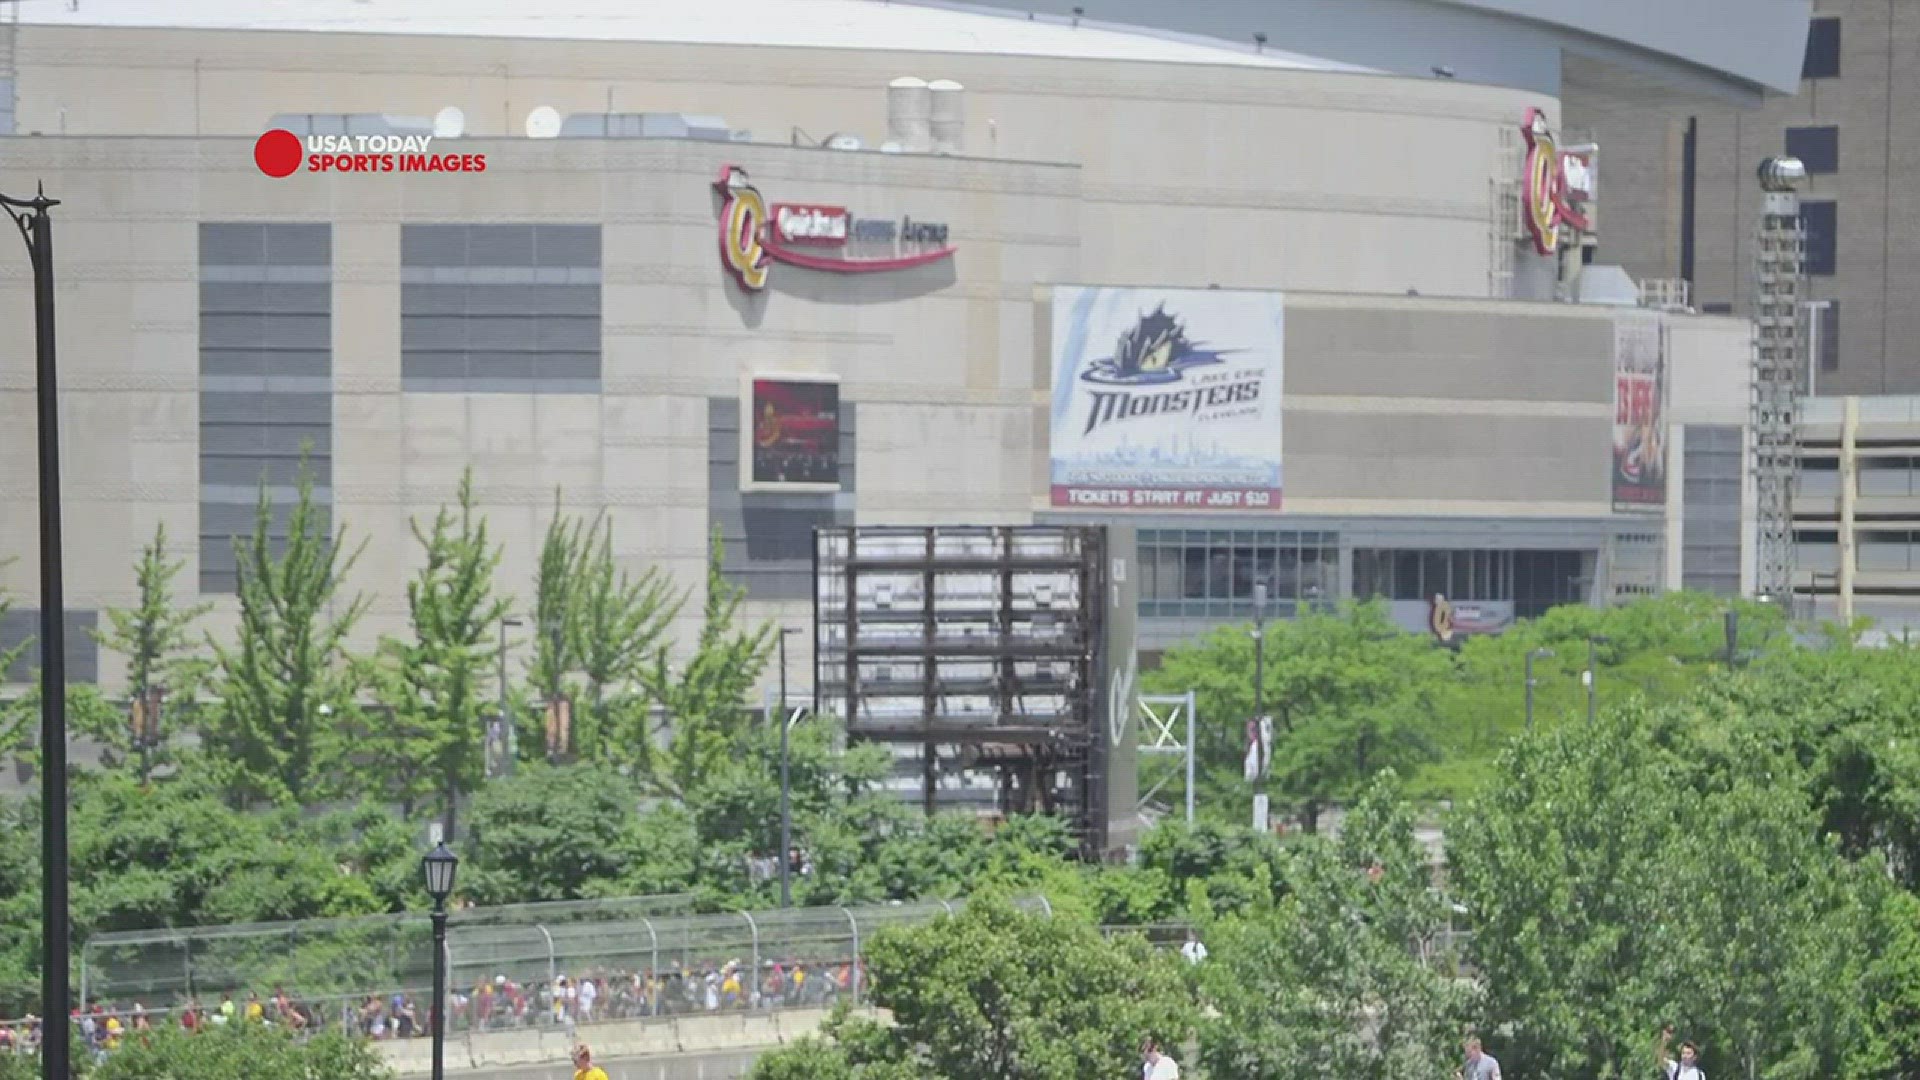 Cleveland Cavaliers announce plans for $140 million renovation of